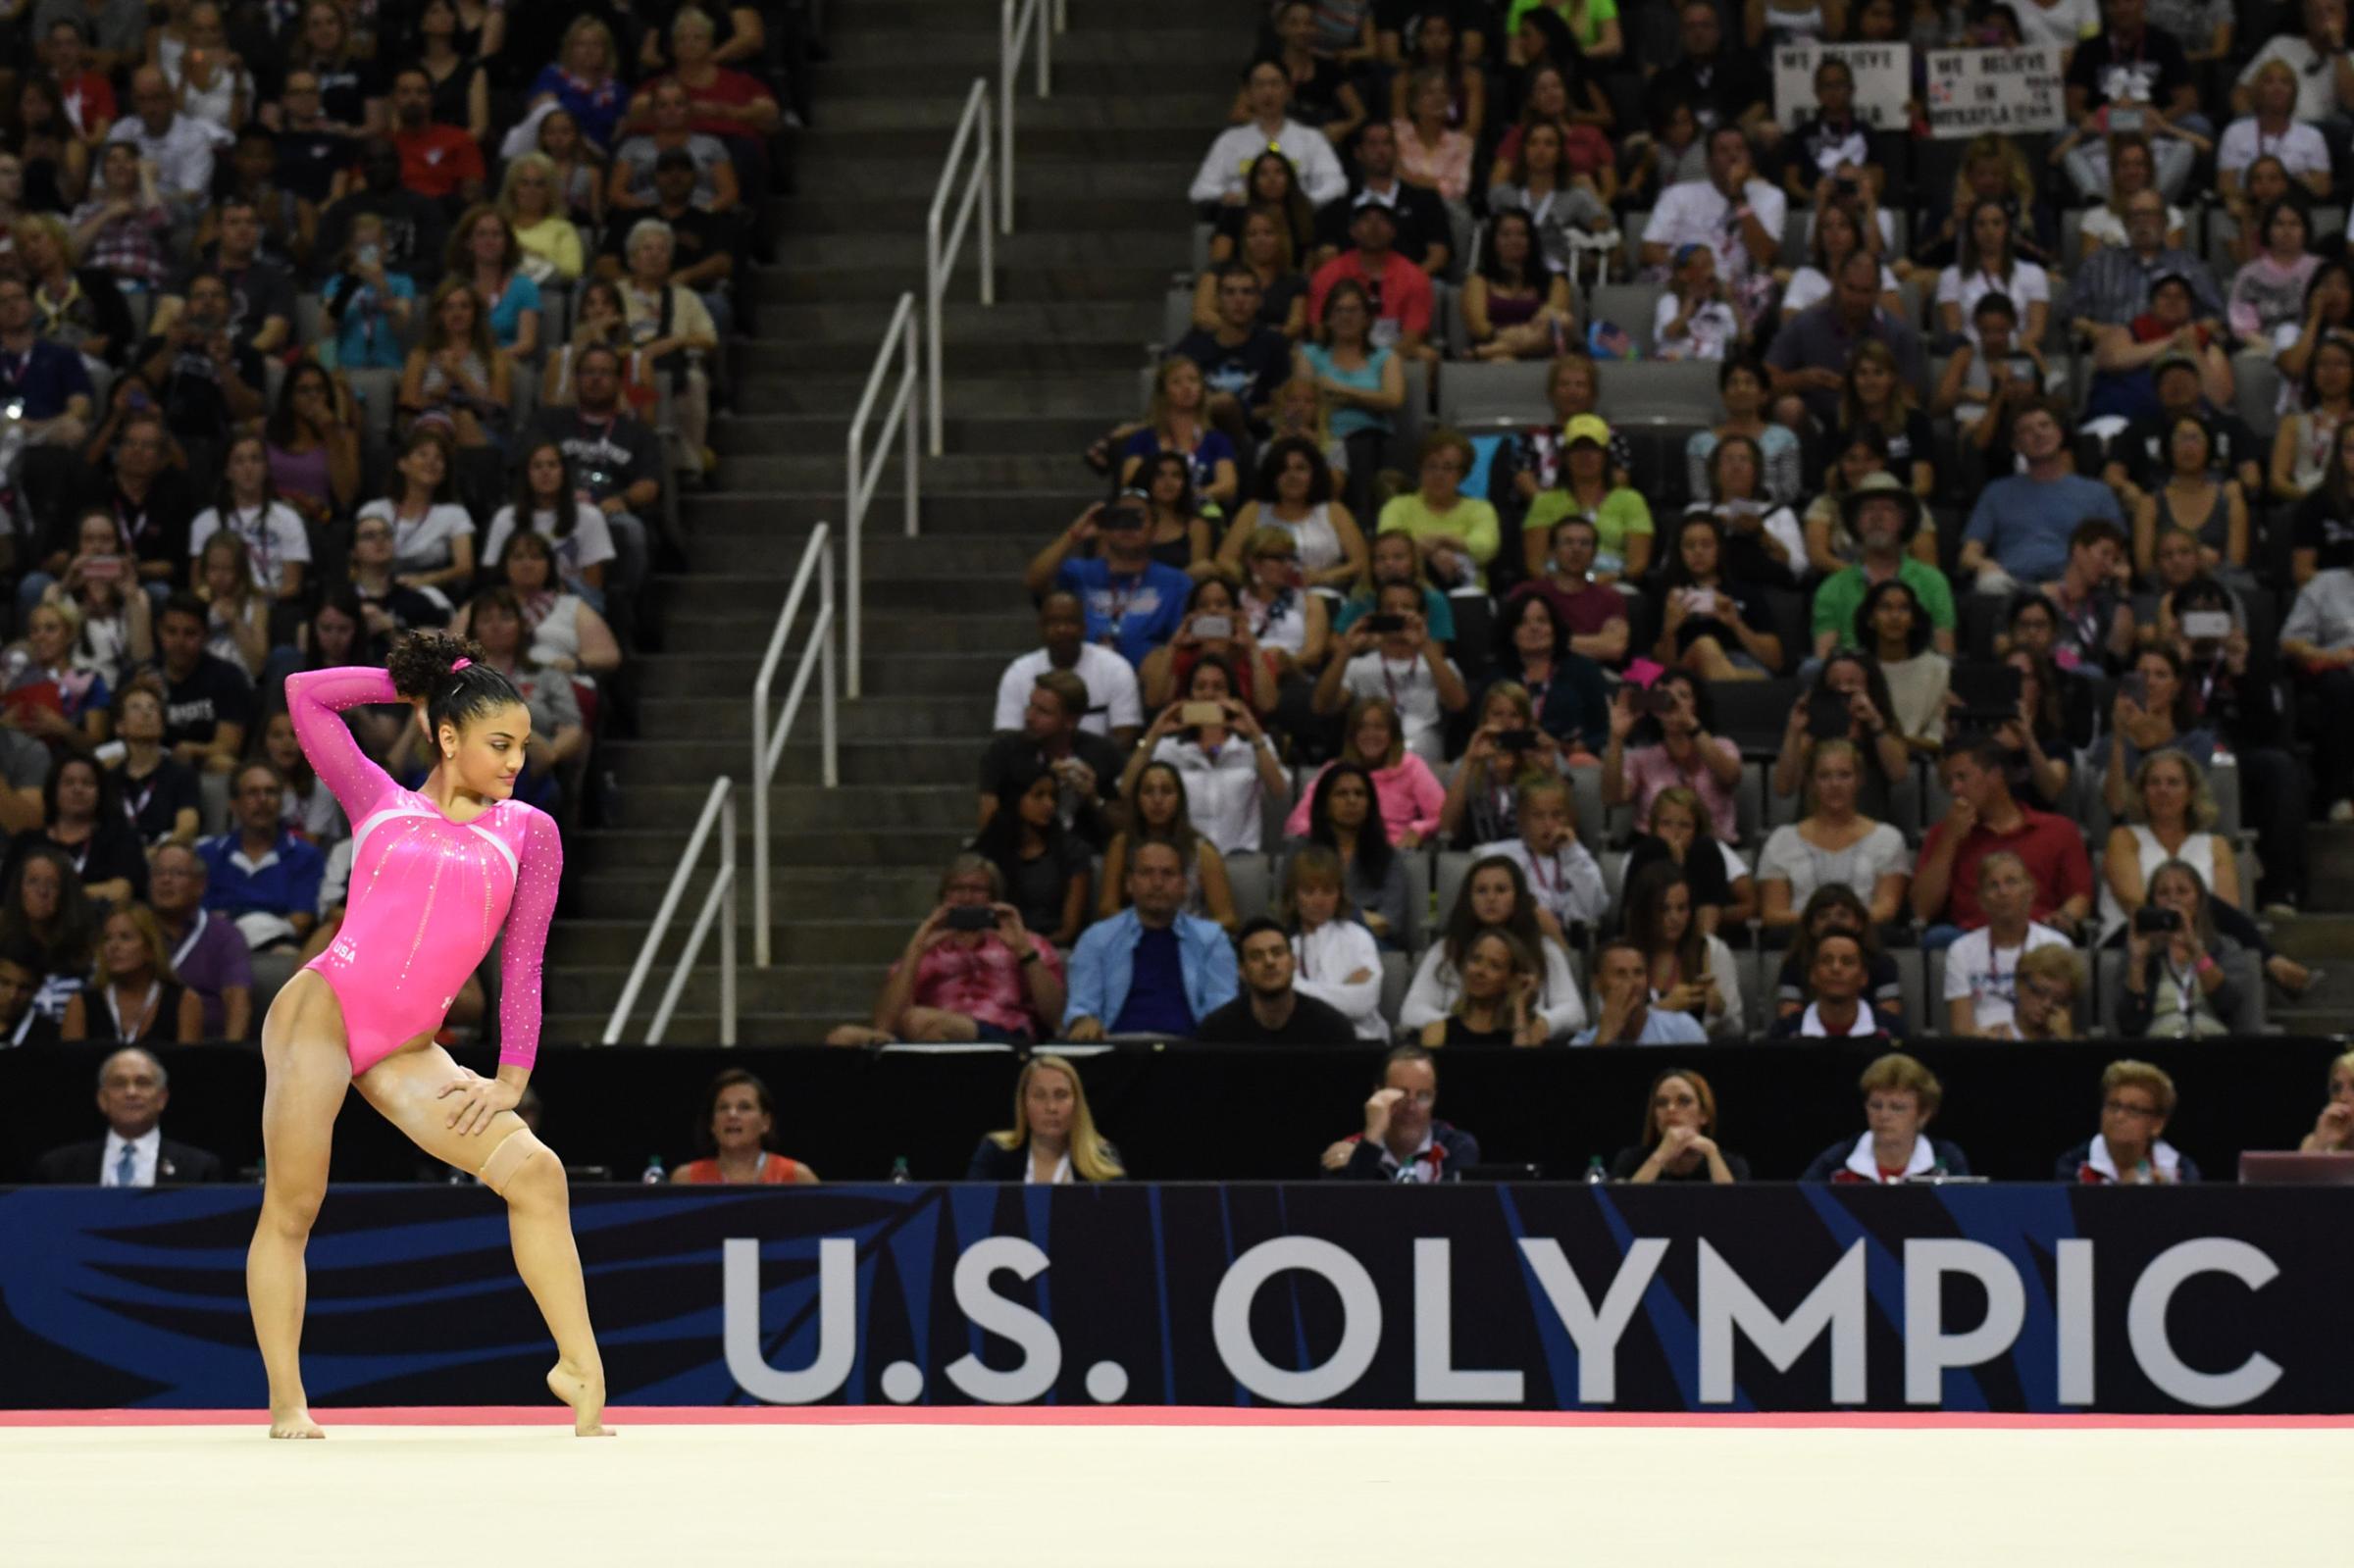 Laurie Hernandez—At just 16, the New Jersey native has infectious energy and a floor routine that could put her on the podium next to teammate Simone Biles in the all-around competition.